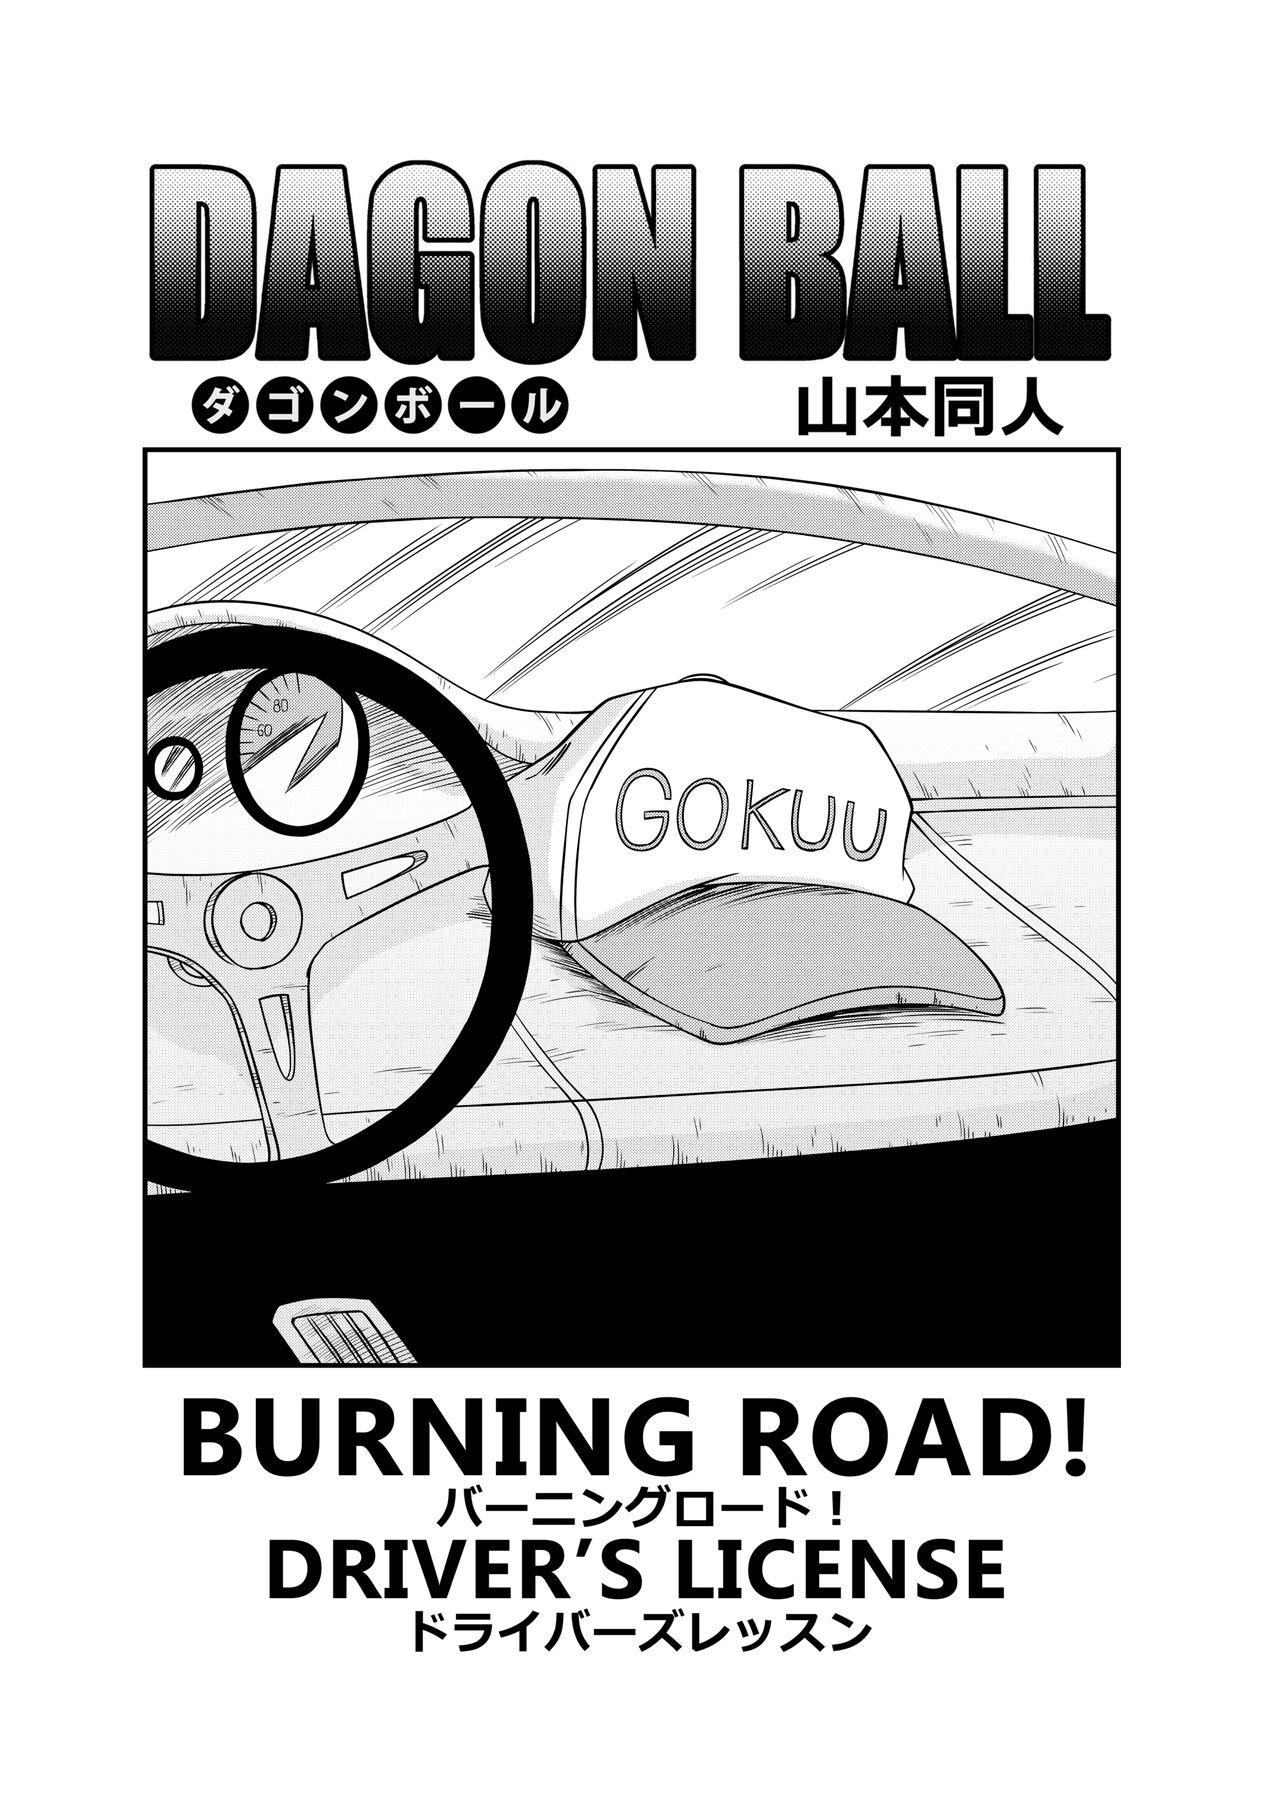 One Burning Road - Dragon ball z Dragon ball Gaygroupsex - Page 3